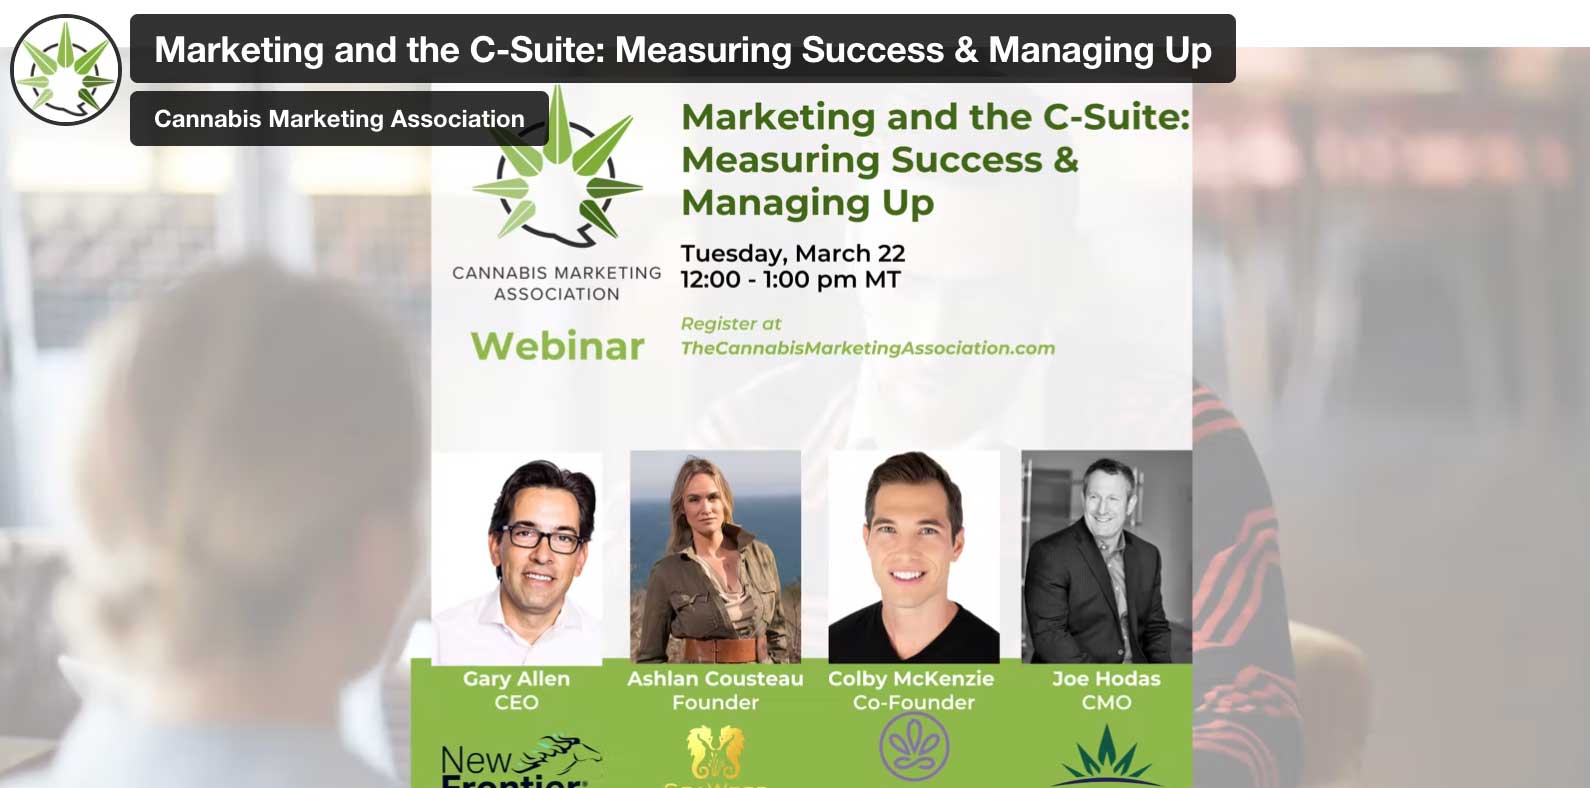 CMA: Marketing and the C-Suite: Measuring Success & Managing Up